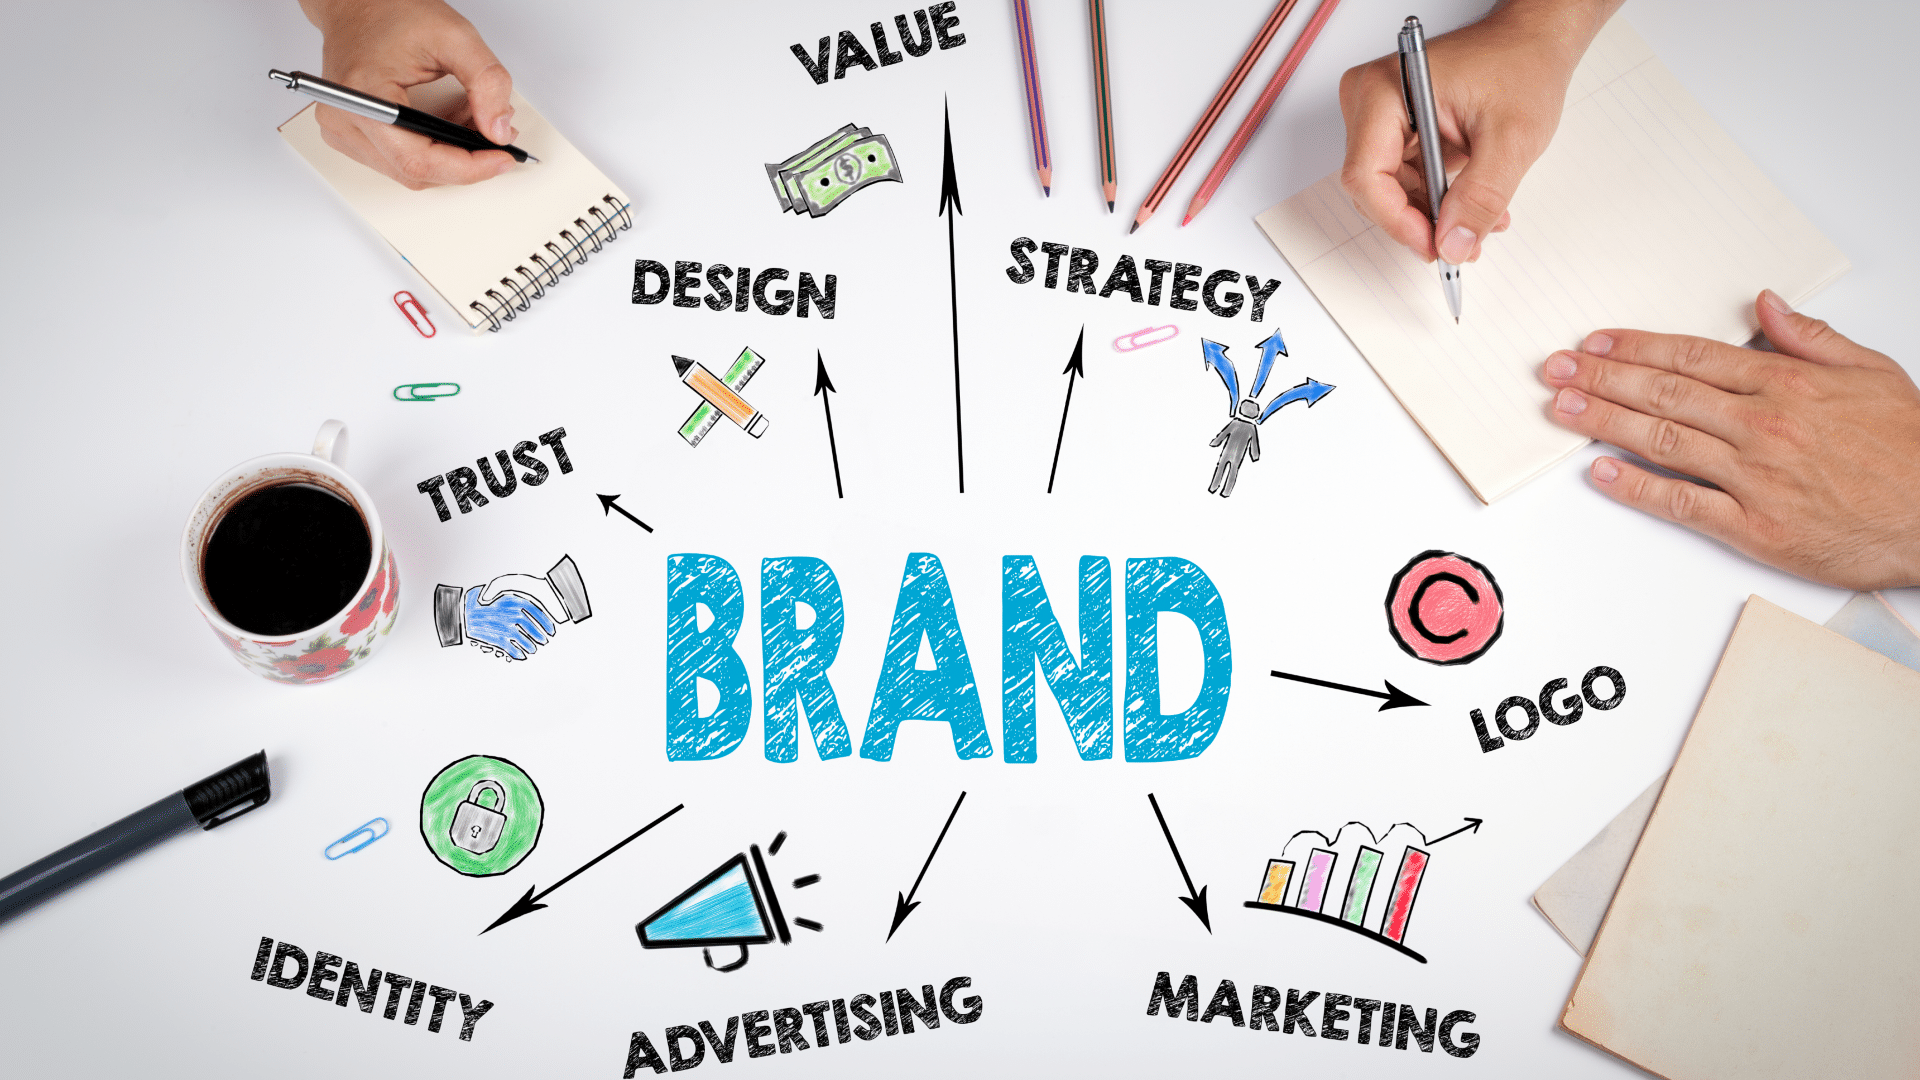 the word "brand" is in the middle of a web surrounded by the following words on a white background: value, design, strategy, trust, logo, identity, advertising, and marketing